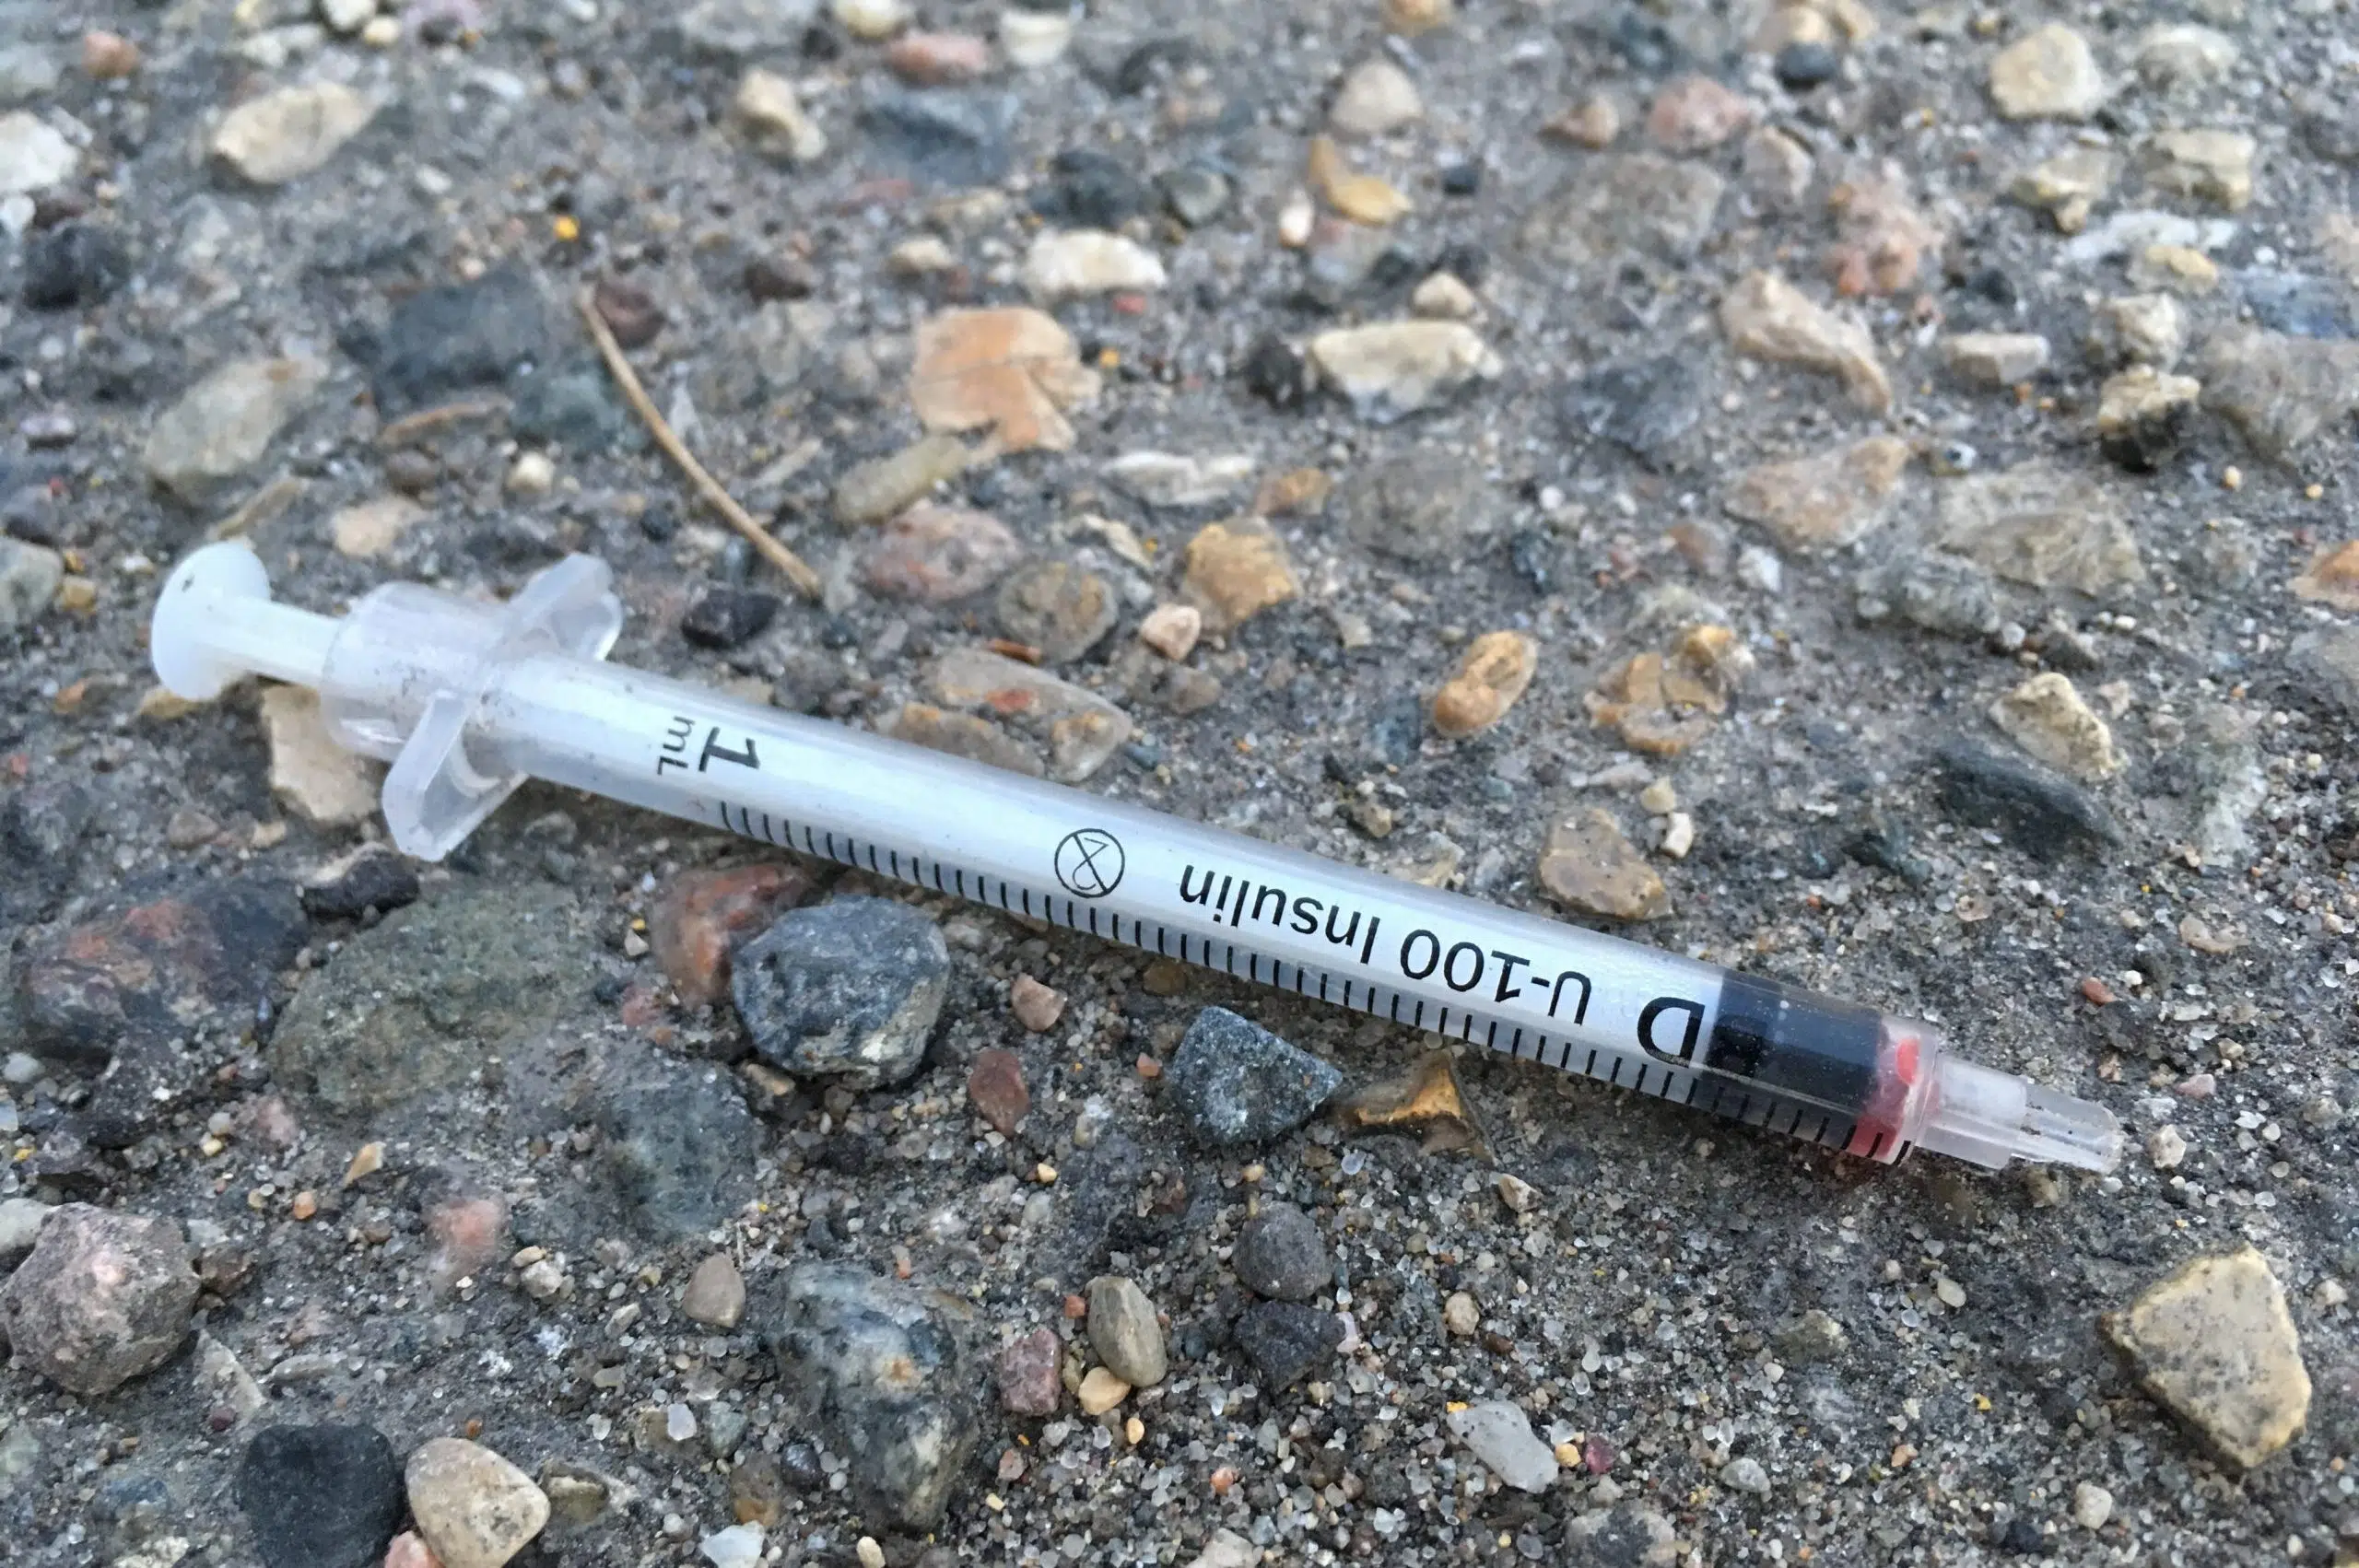 Requests for disposal of used needles picking up for local fire departments